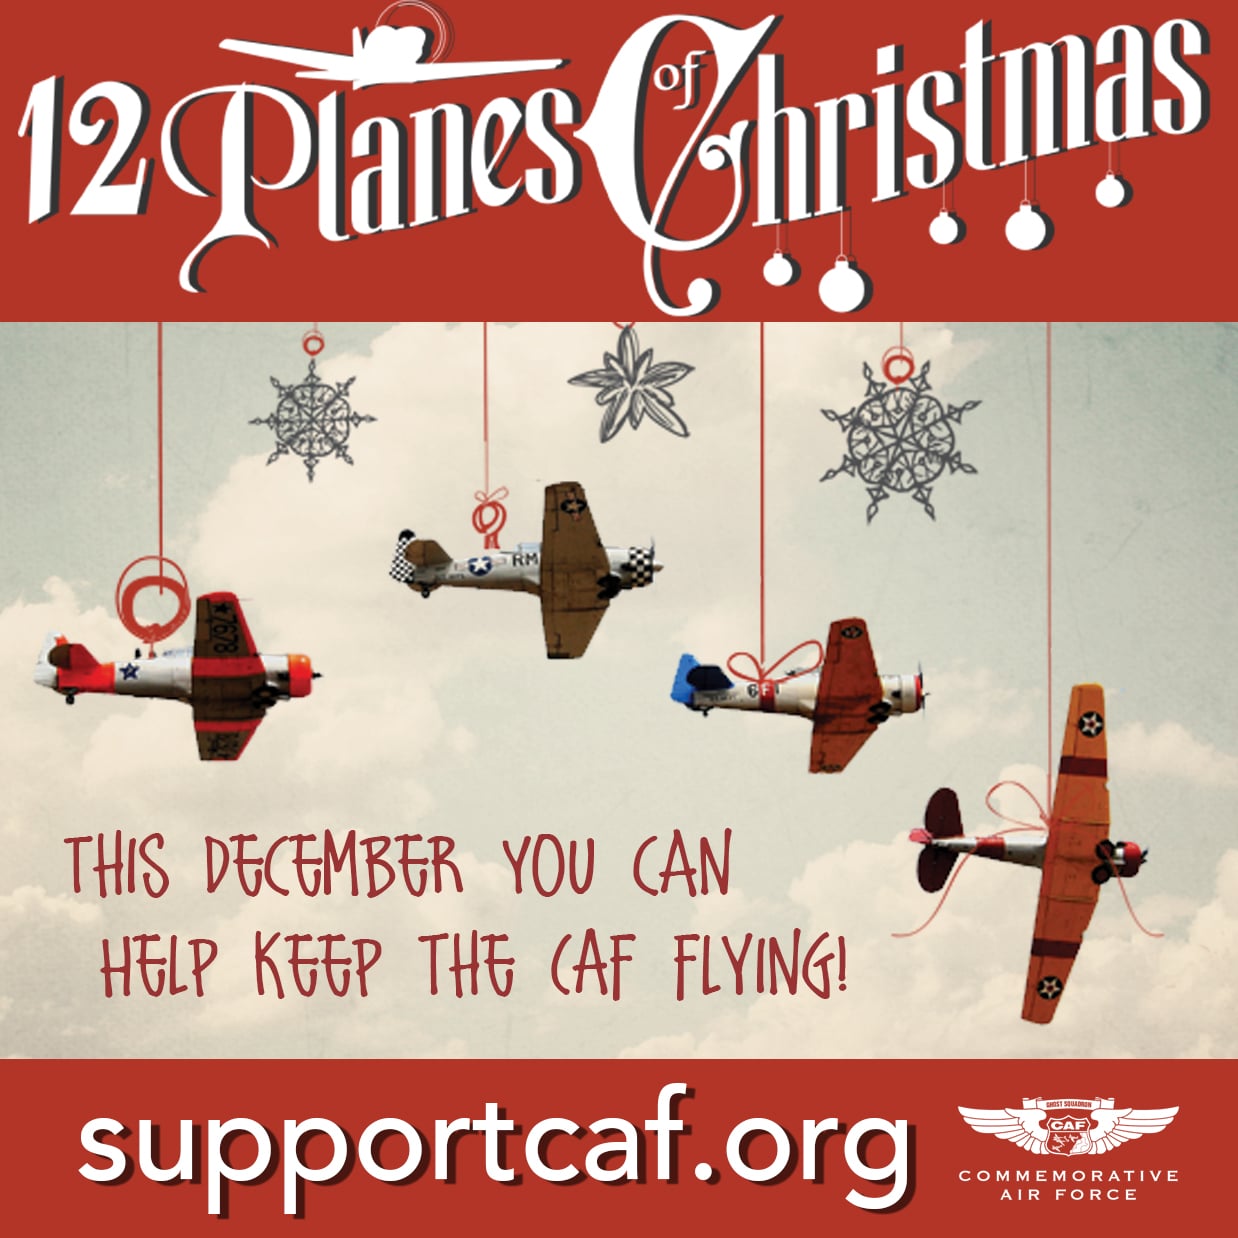 Commemorative Air Force Launches Holiday Giving Campaign – “12 Planes of Christmas”